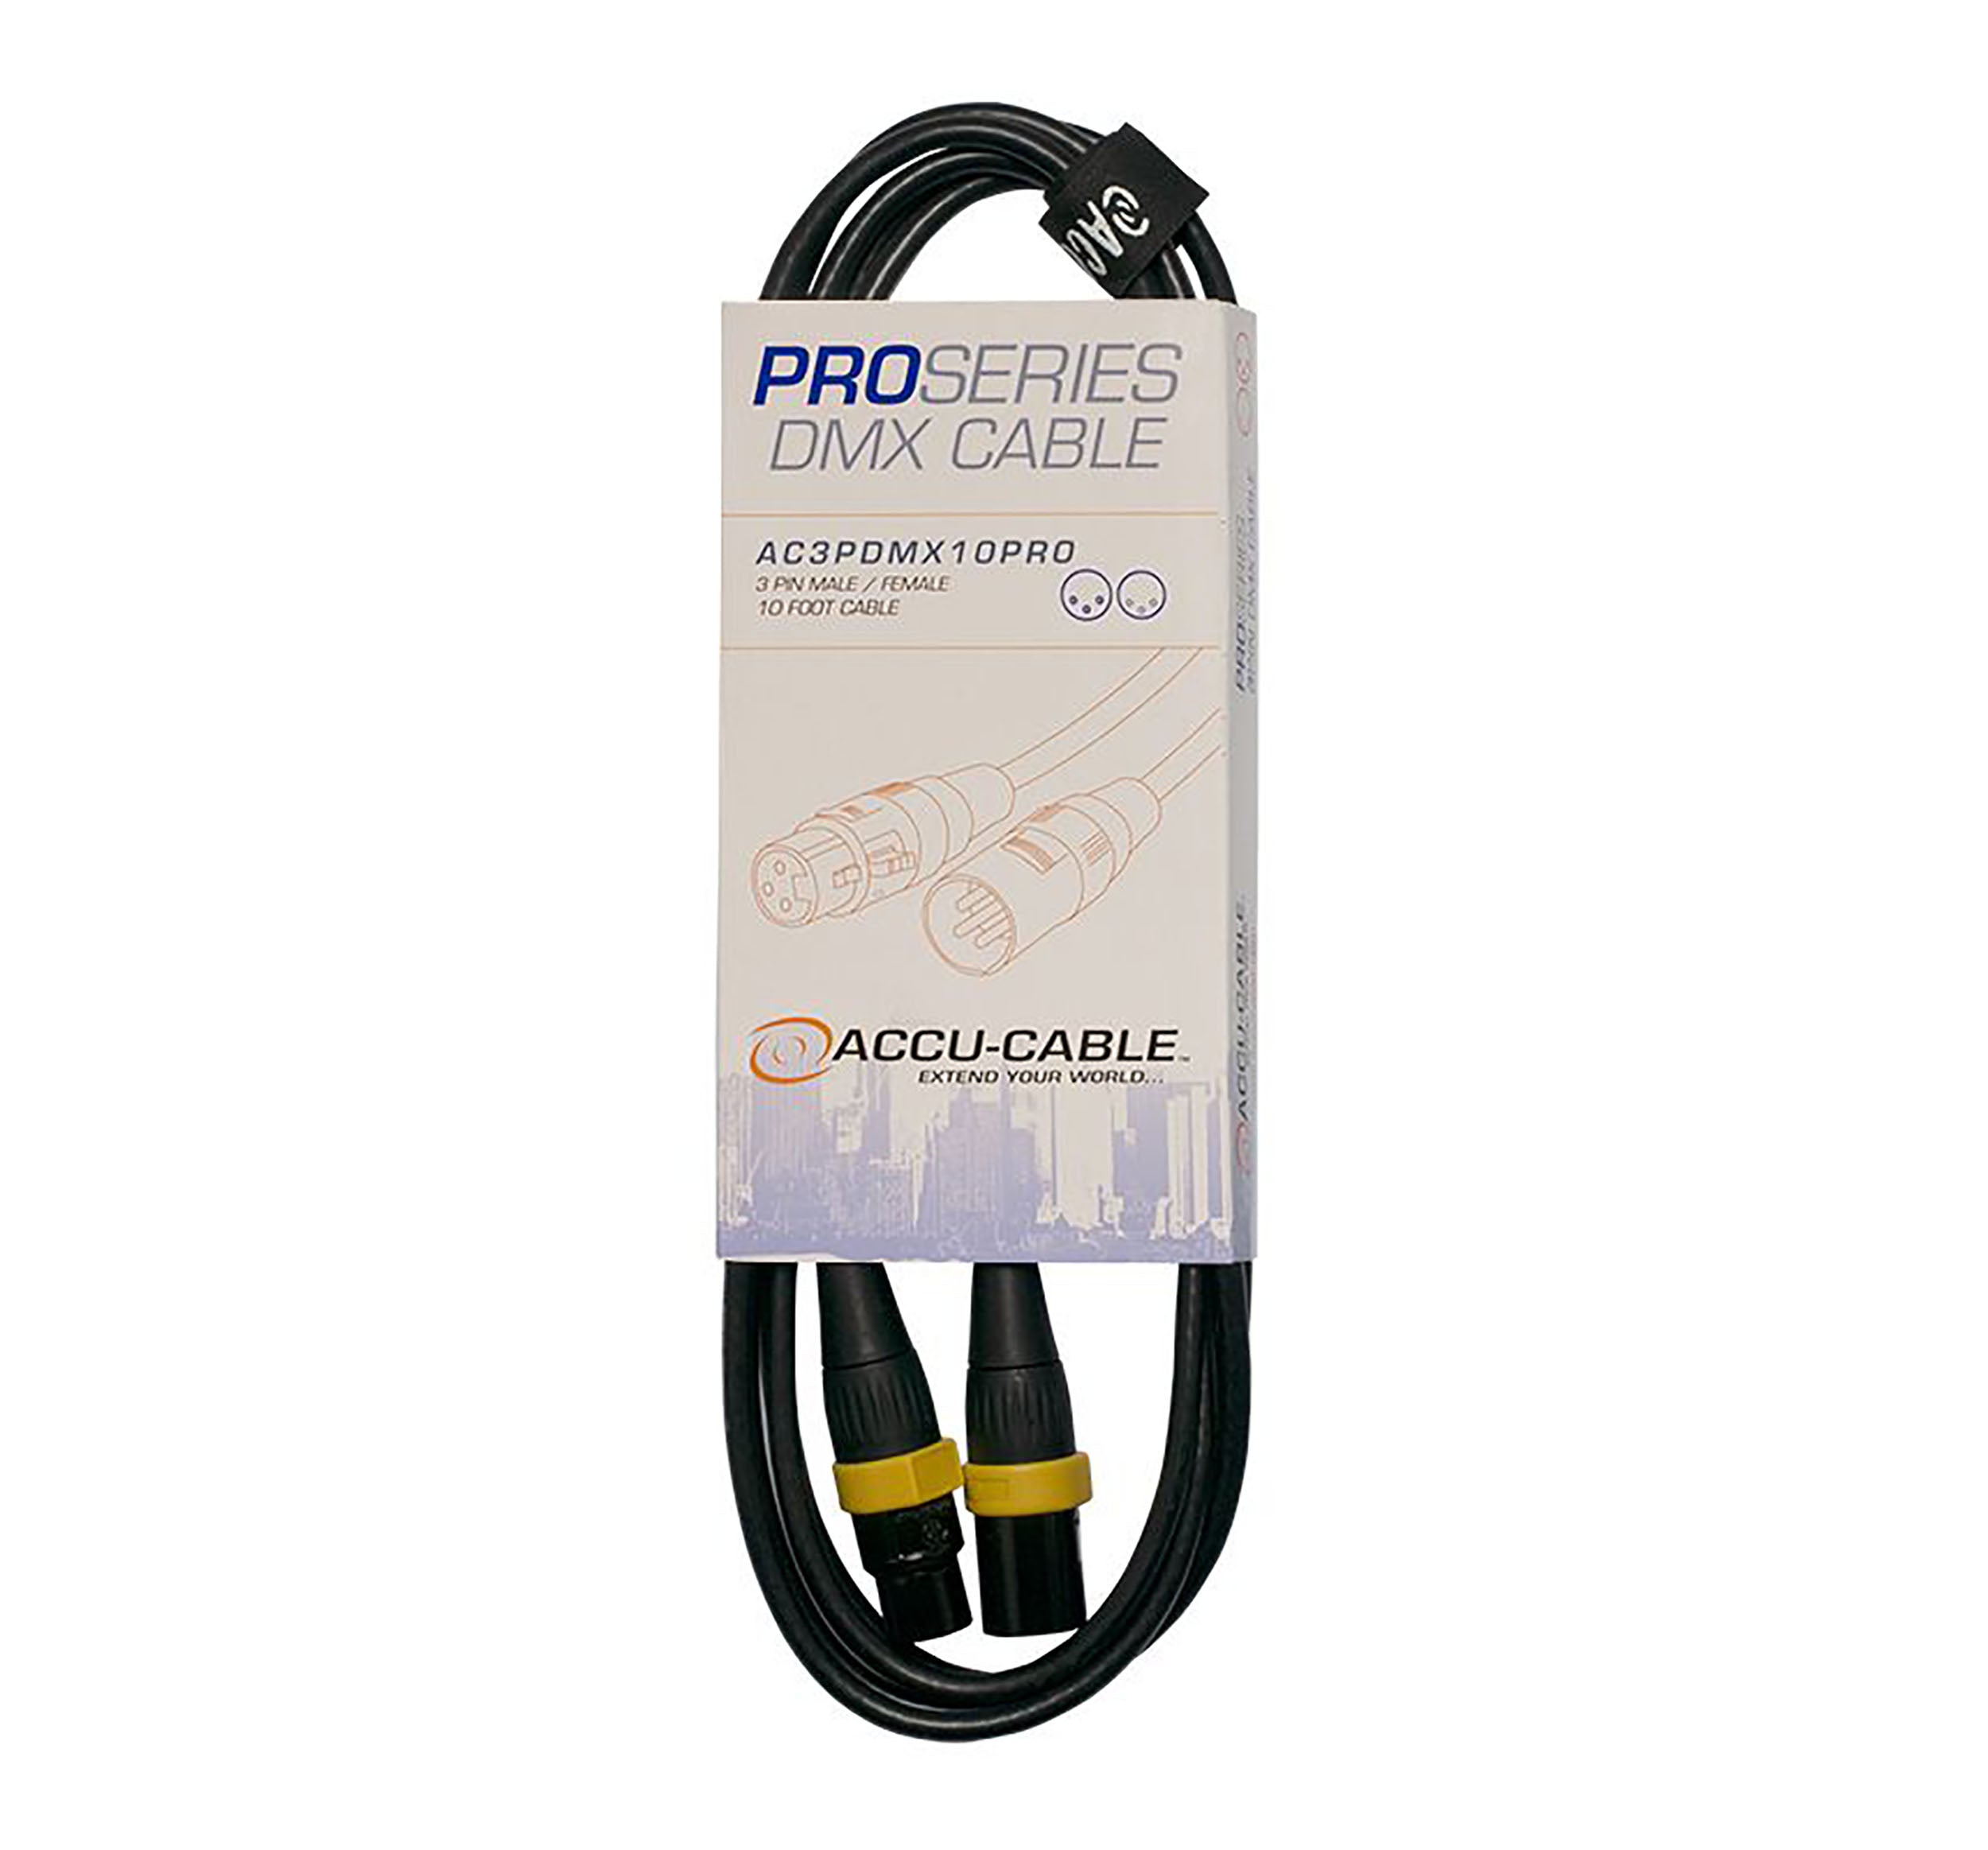 Accu-Cable AC3PDMX10PRO, Pro Series 3-Pin Male to 3-Pin Female Connection DMX Cable - 10 Ft by Accu Cable